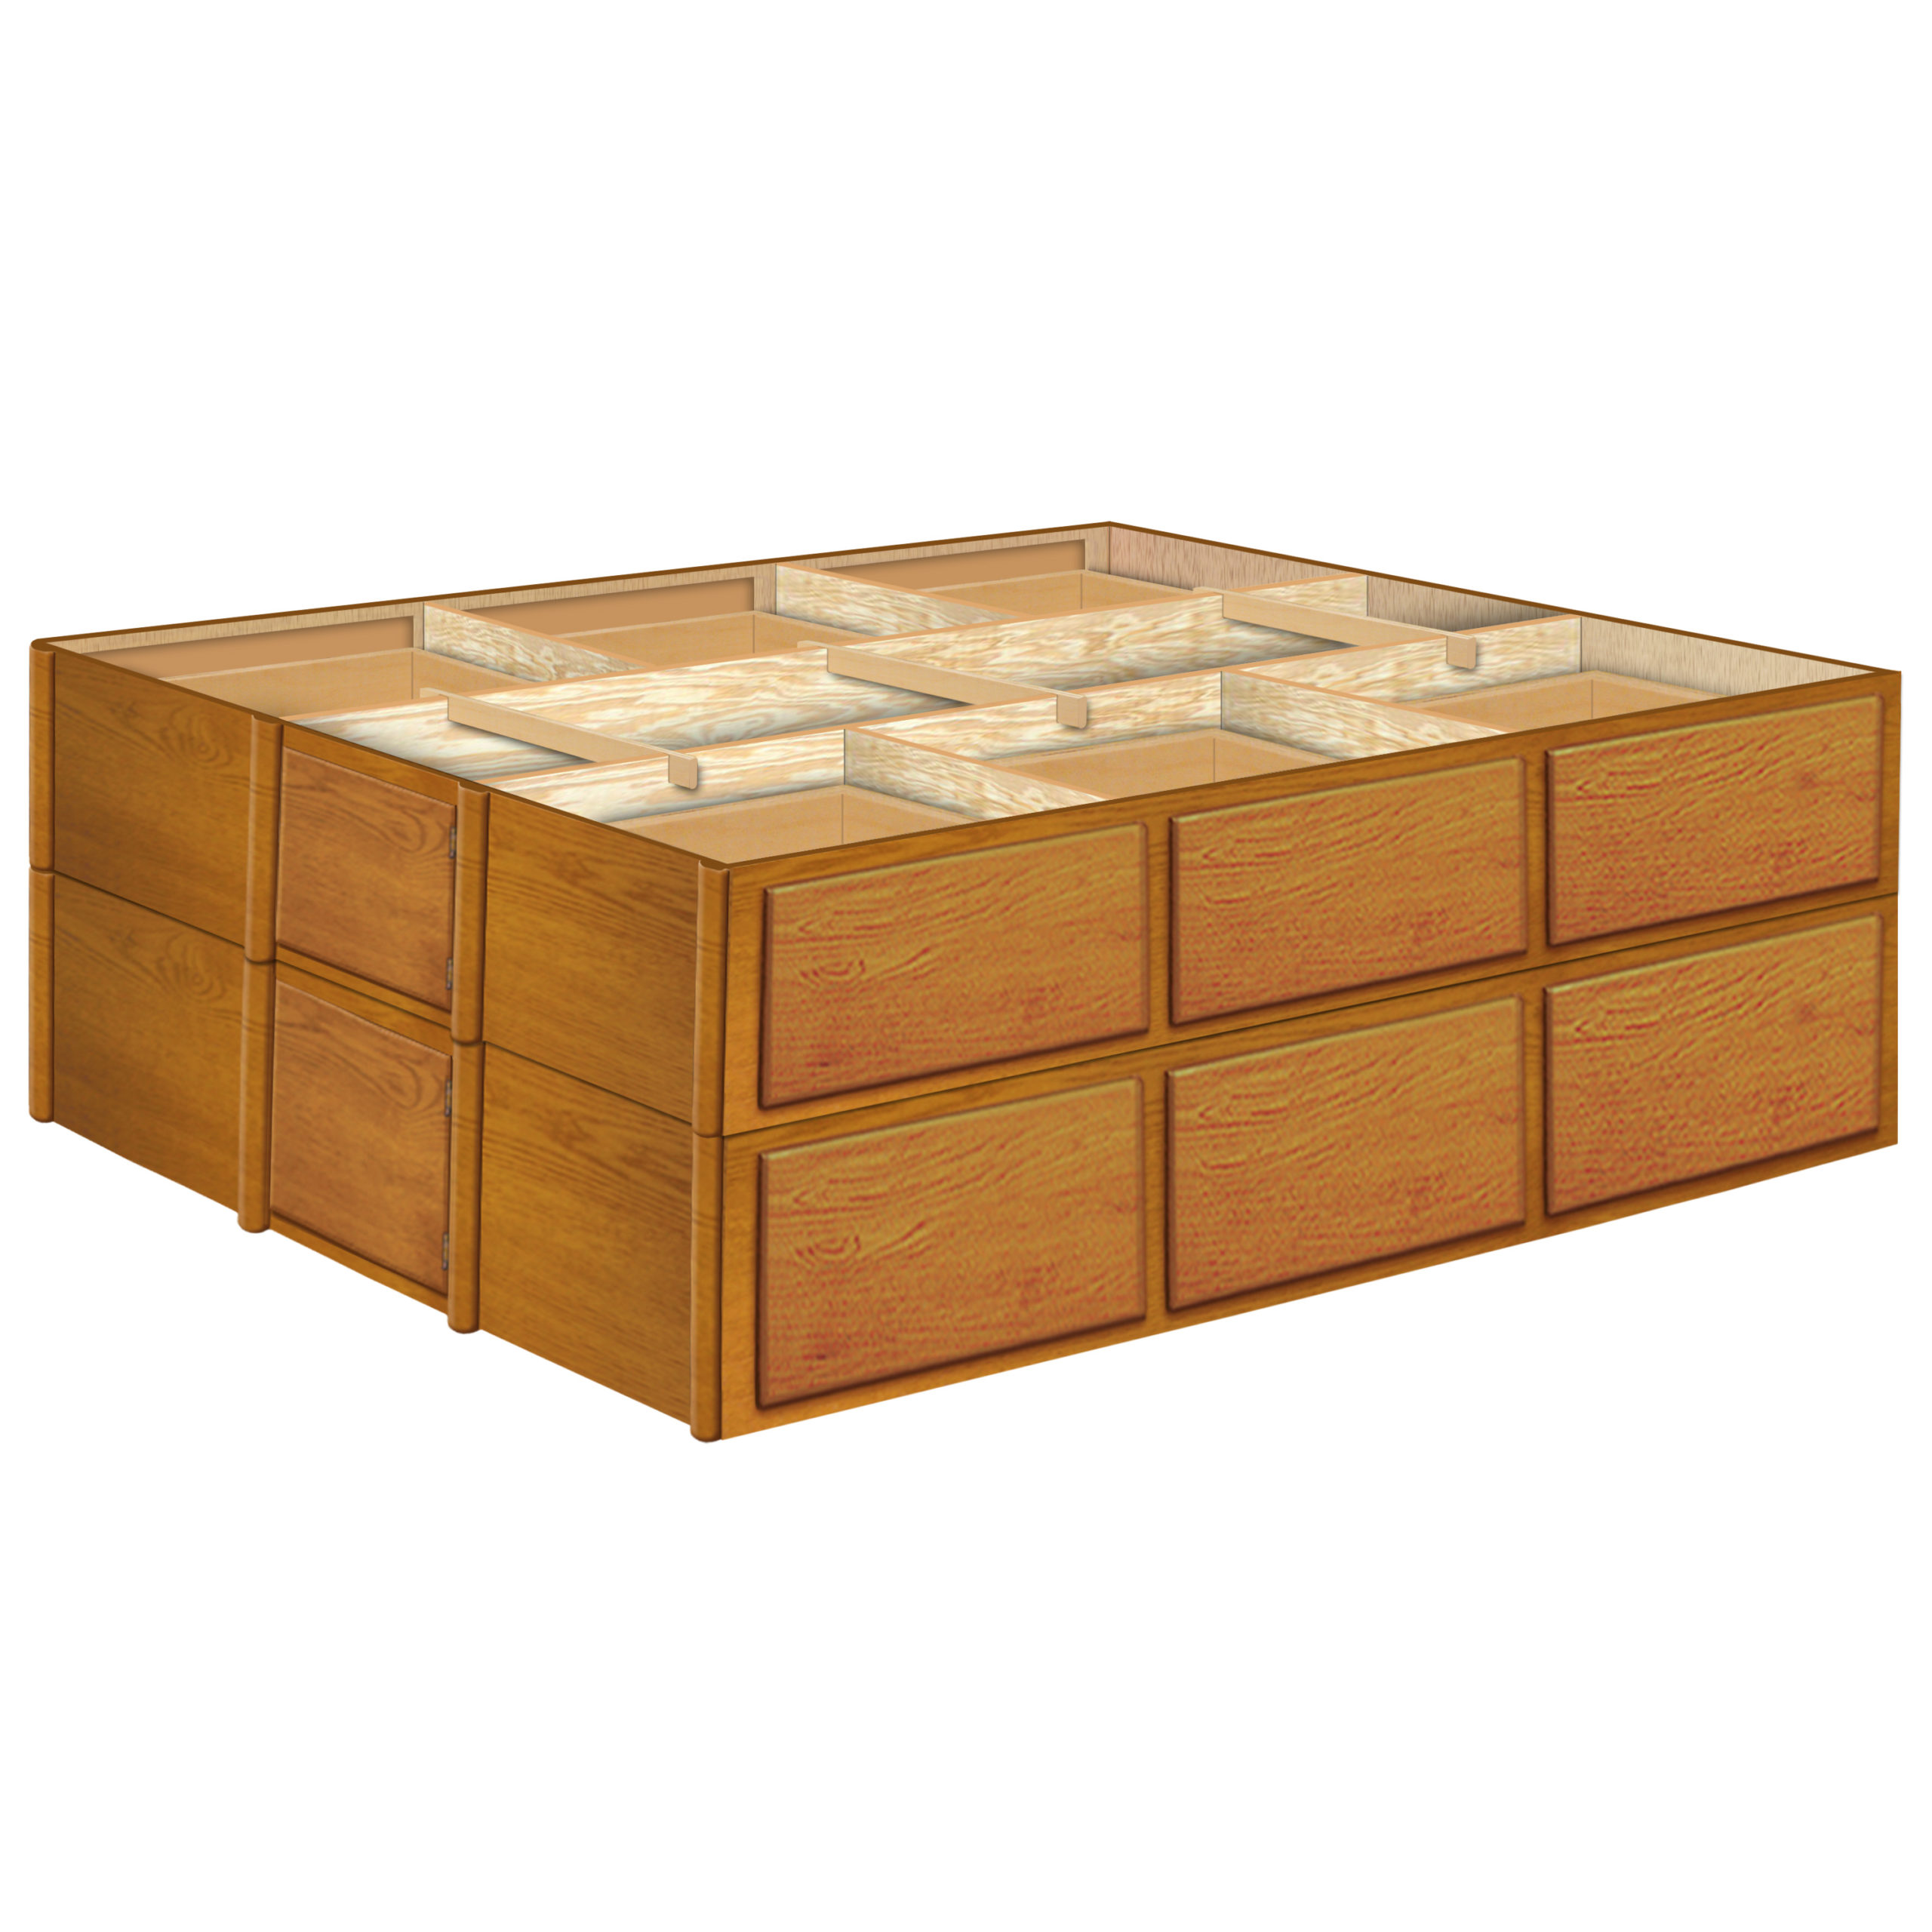 Oak 12 Drawer Double Stacked Pedestals, Oak King Size Bed With Drawers Underneath